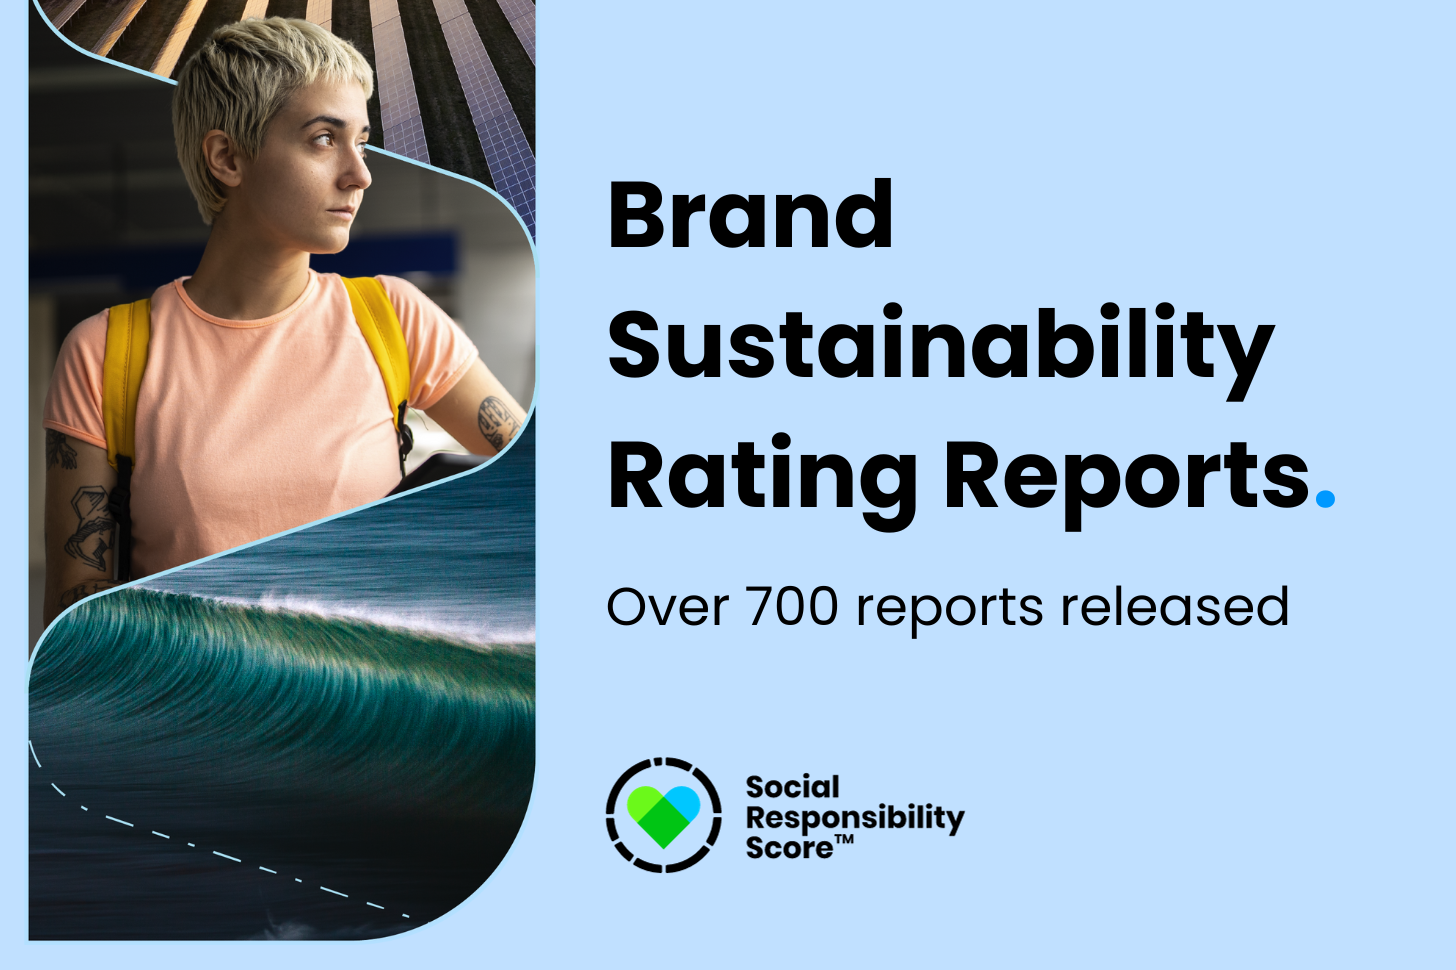 "Brand Sustainability Rating Reports." Cover